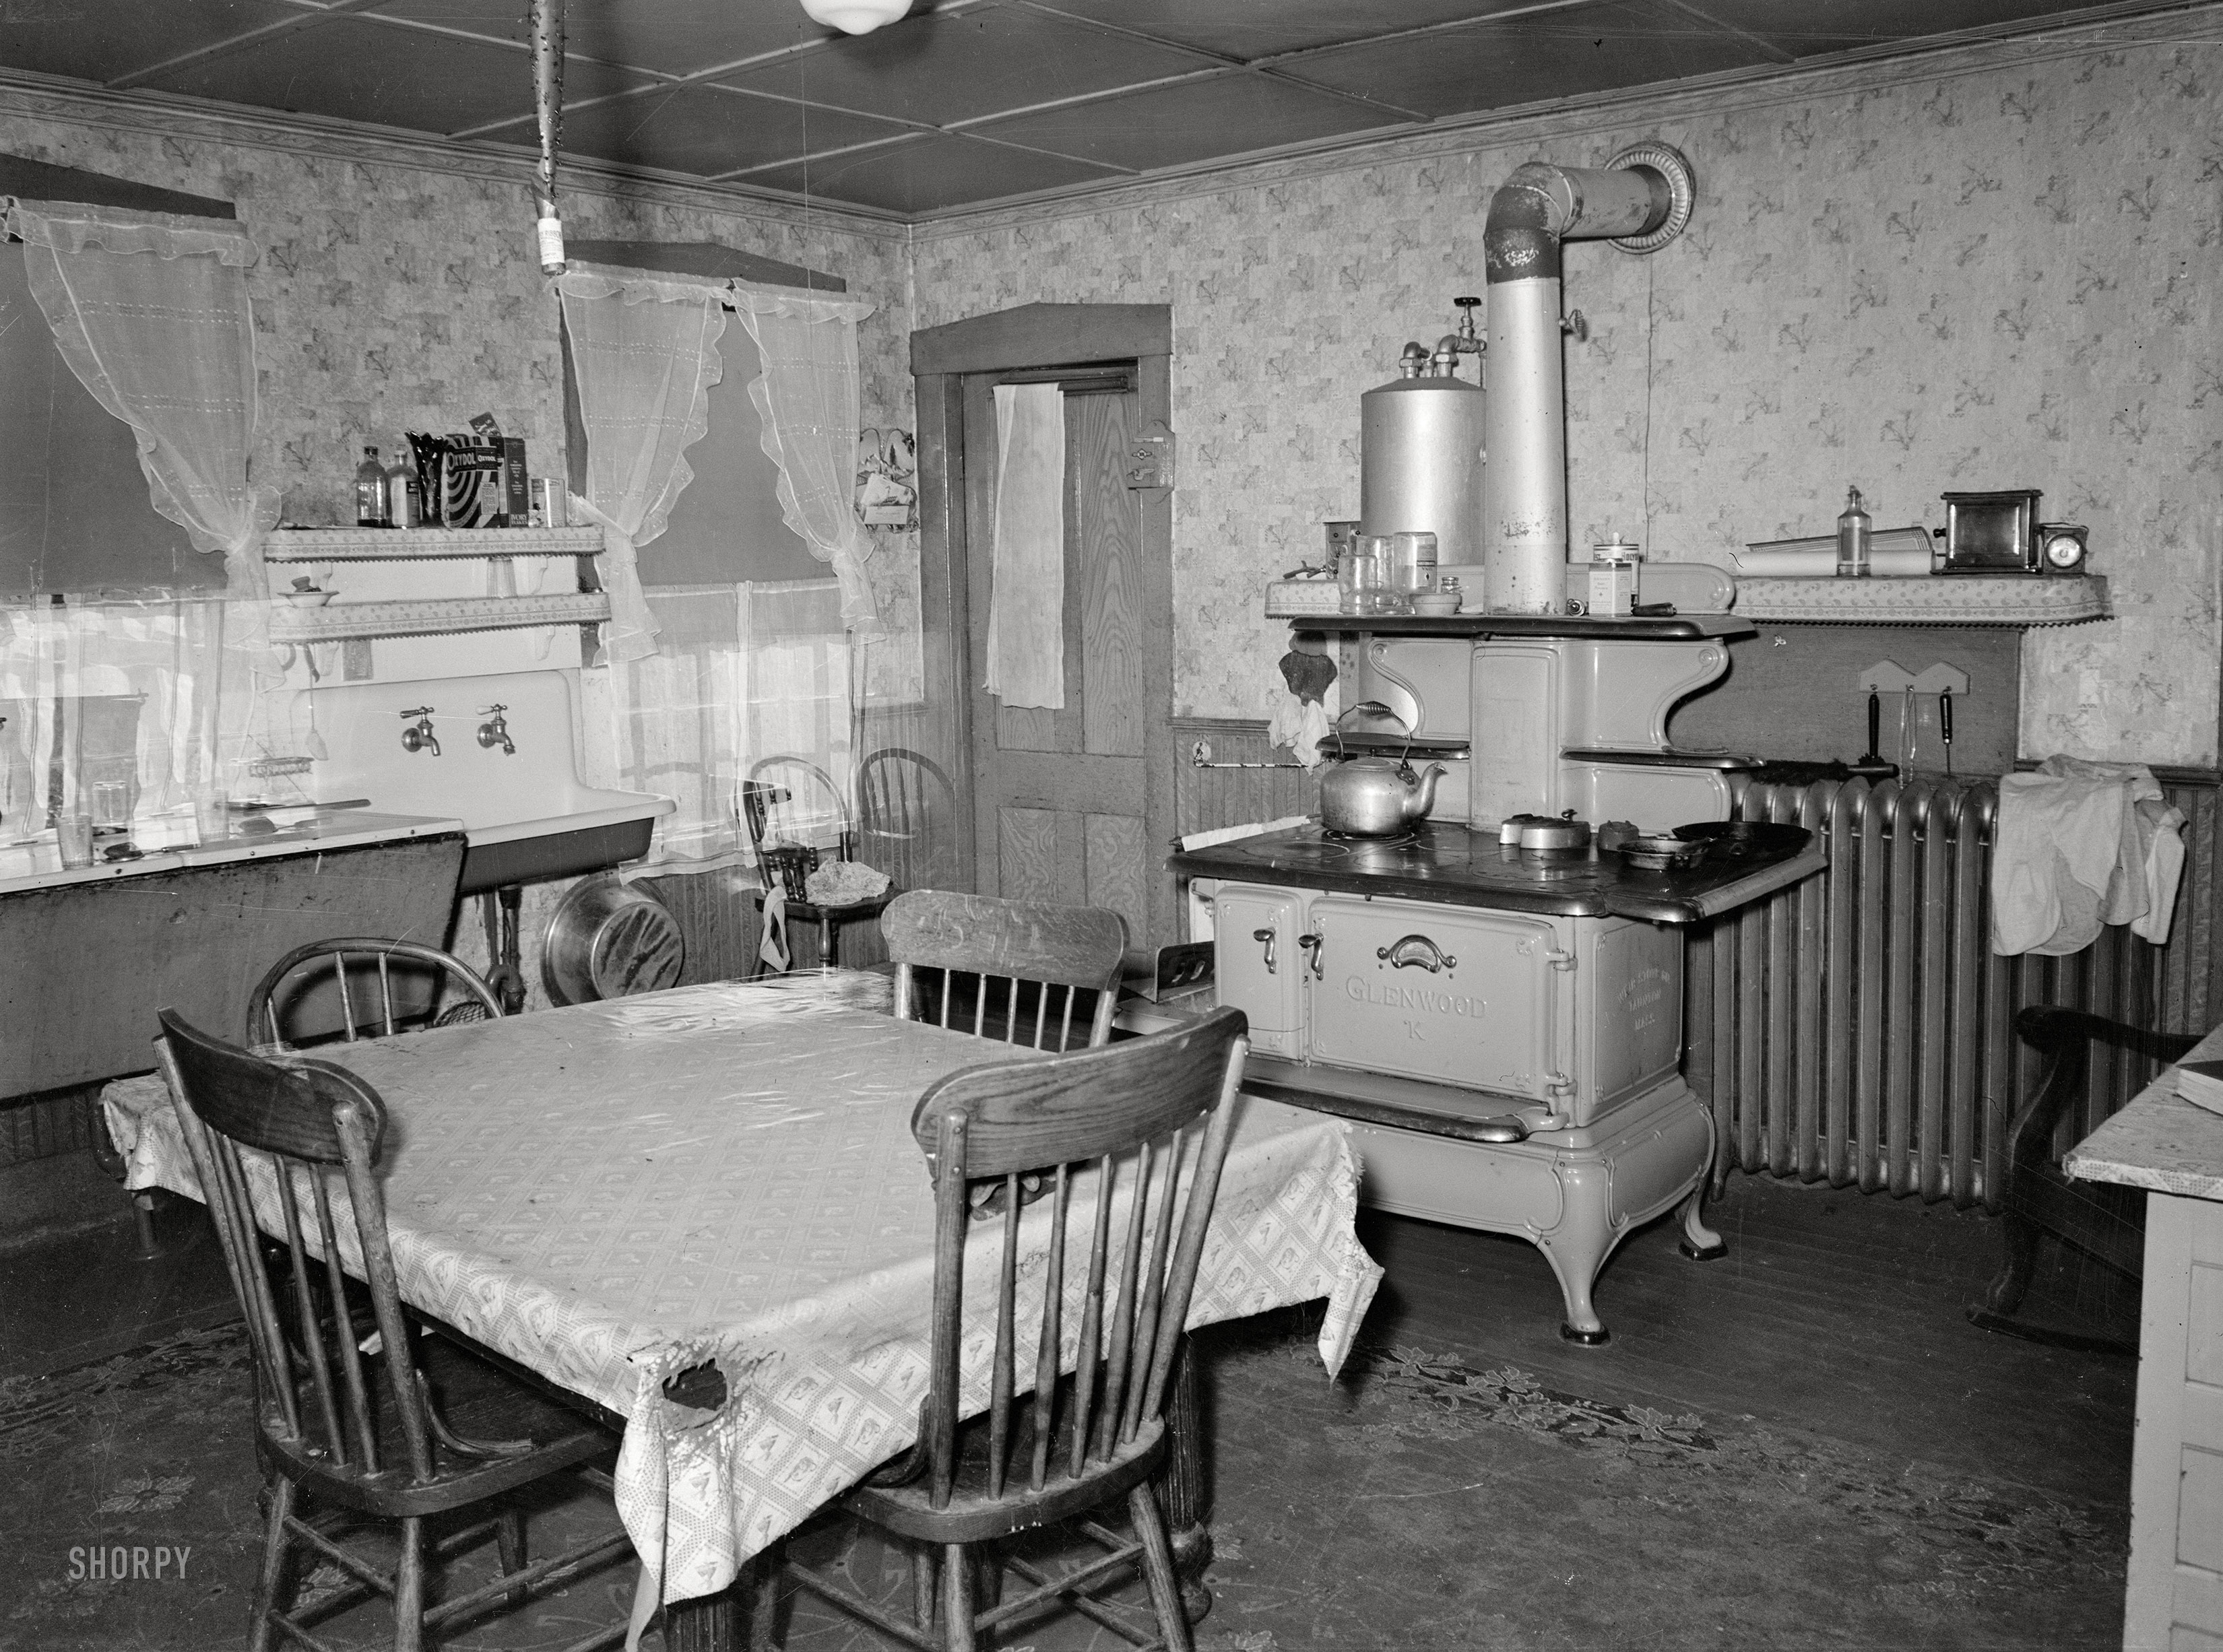 1938. "Tolland County, Connecticut. The kitchen on the Schneider farm." Acetate negative by Sheldon Dick for the Farm Security Administration. View full size.